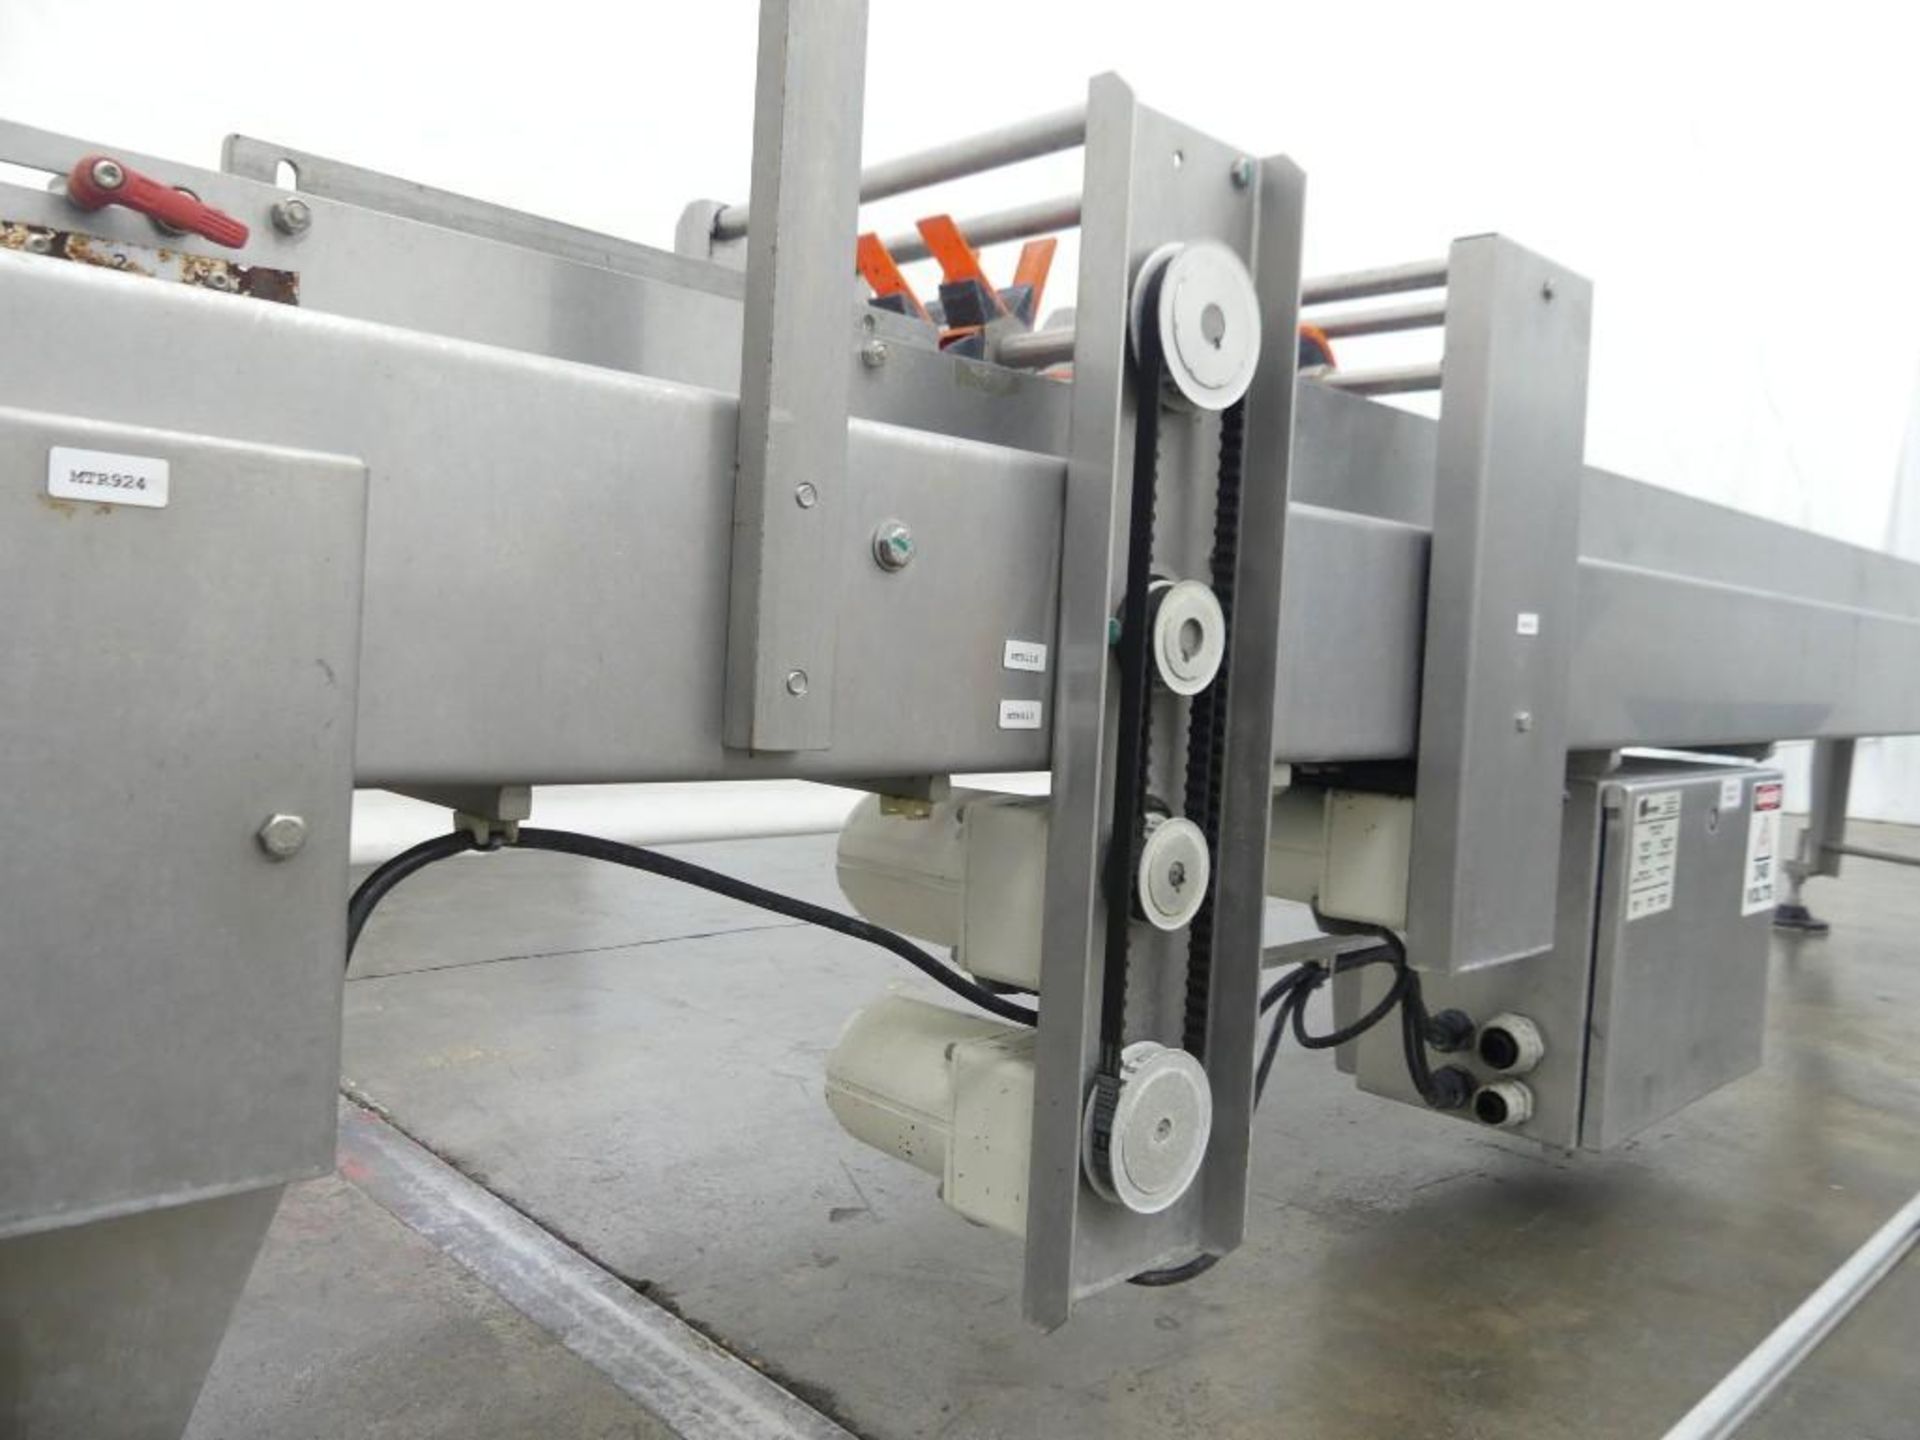 Massman HFFS-IM1000 Flexible Pouch Packaging System - Image 64 of 127